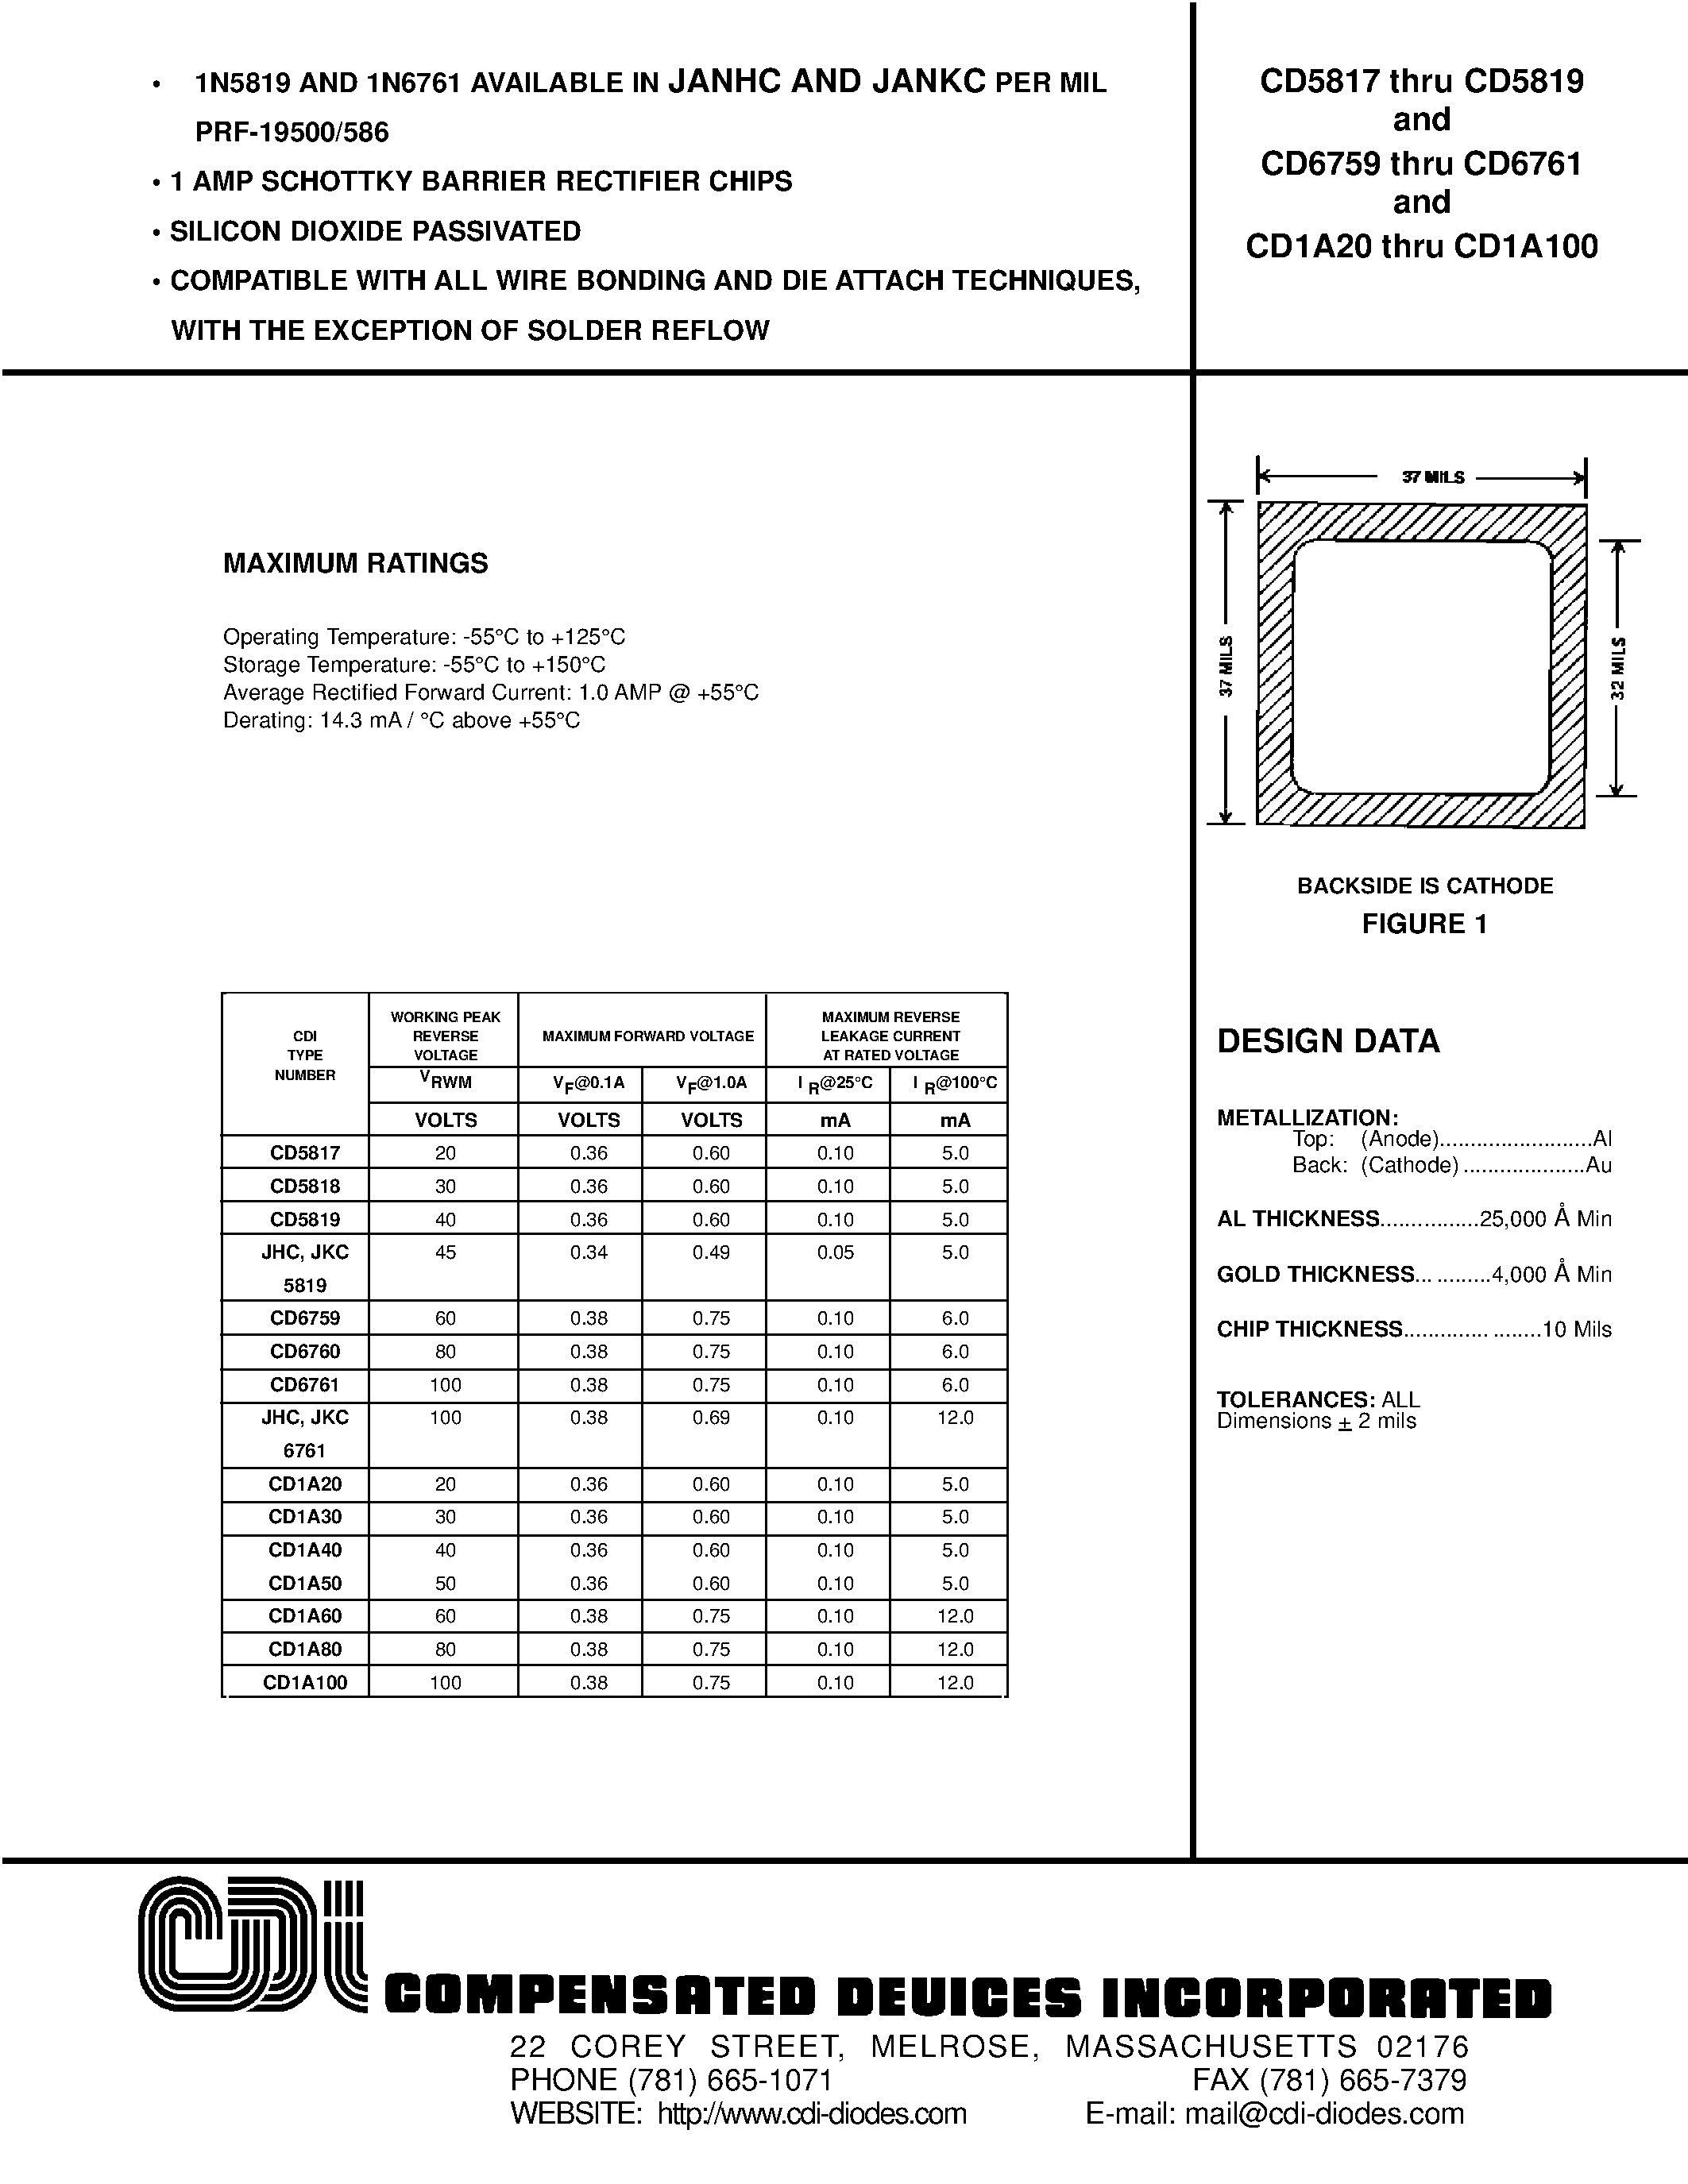 Datasheet CD1A100 - 1 AMP SCHOTTKY BARRIER RECTIFIER CHIPS page 1